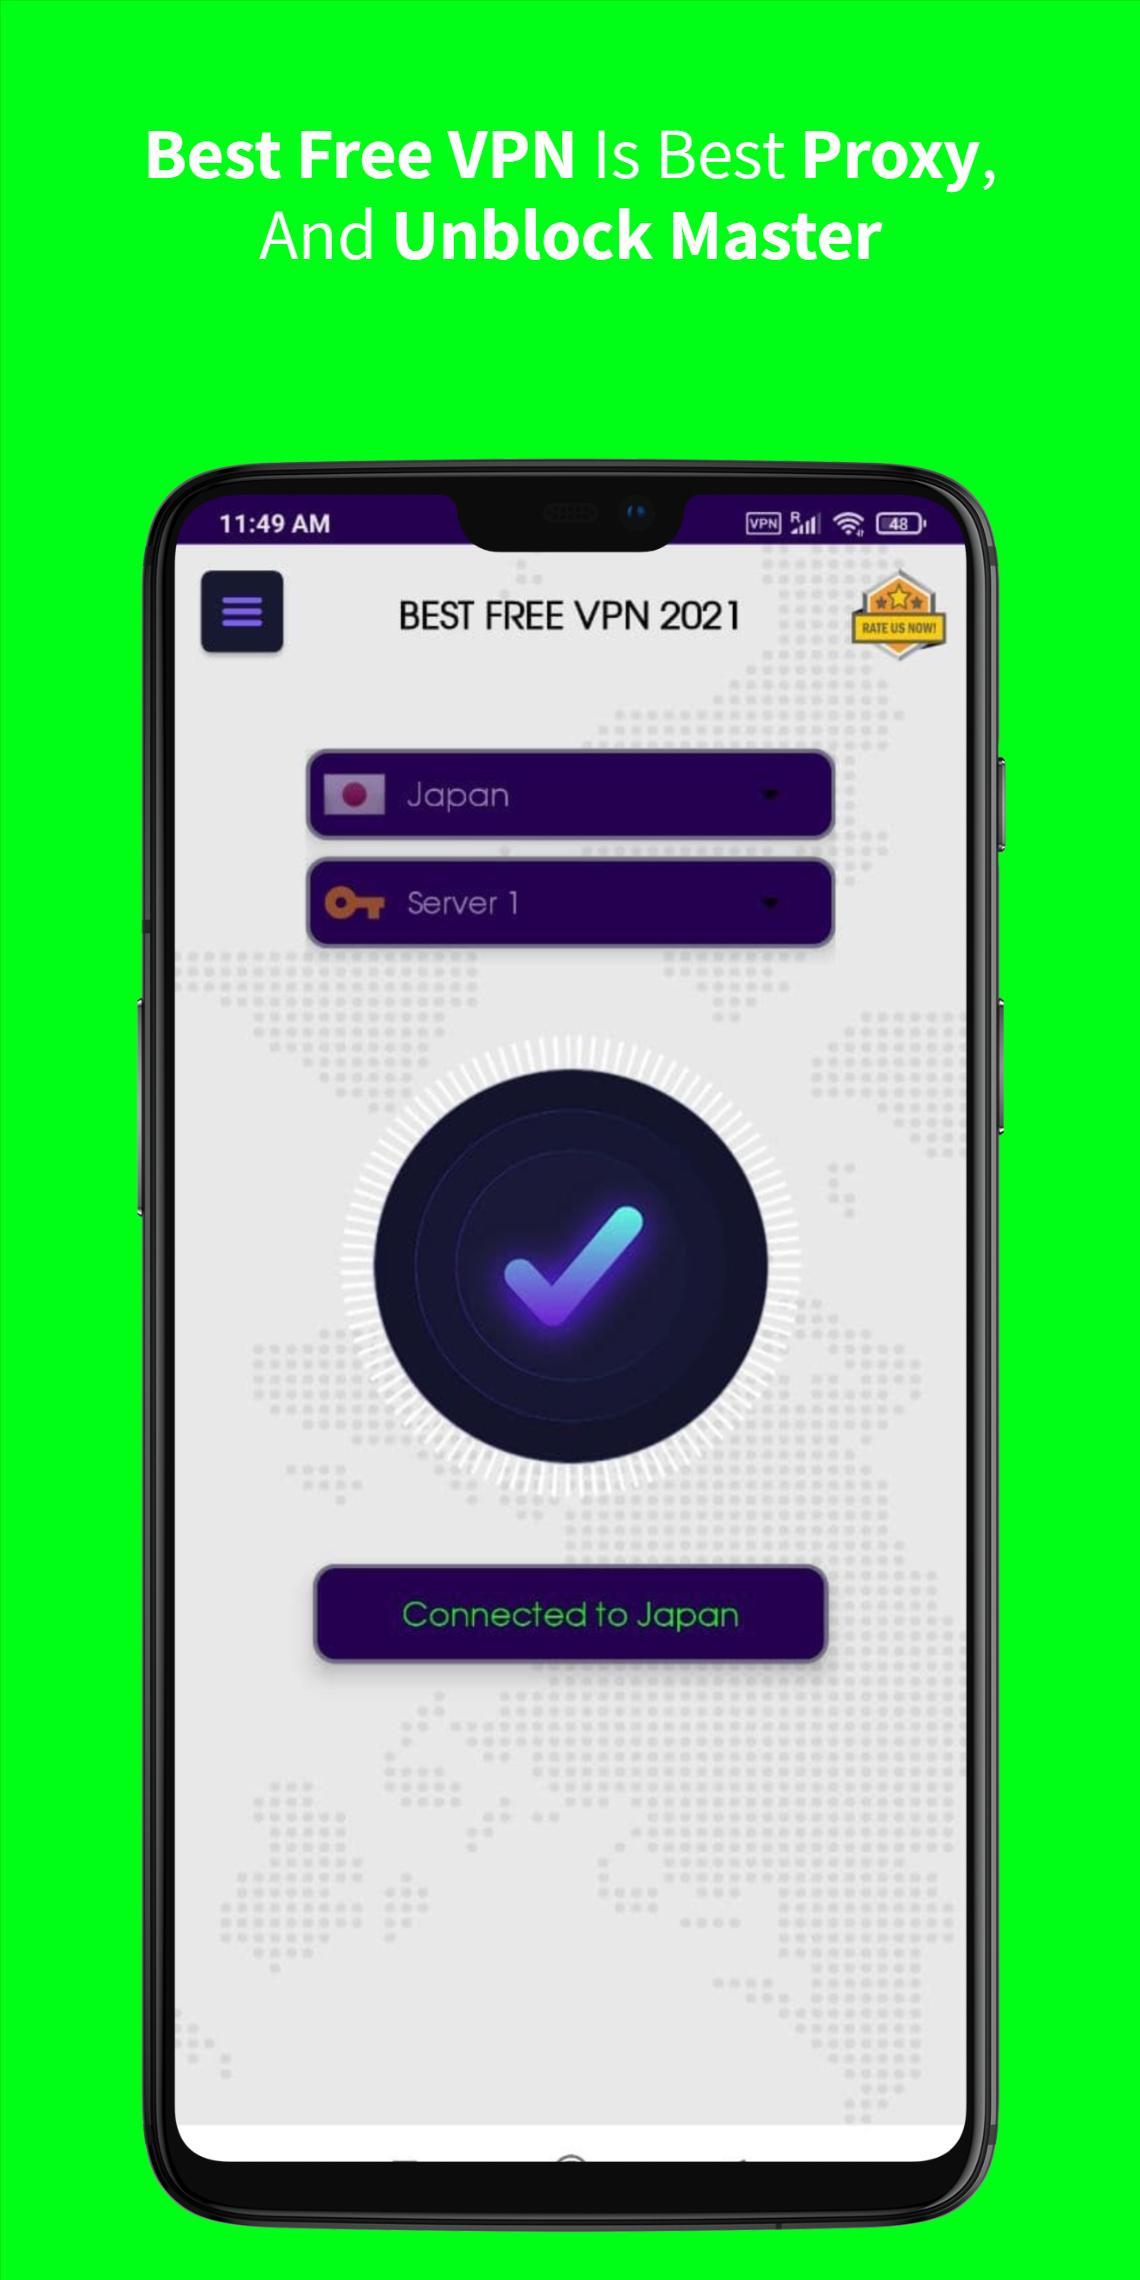 Best Free Vpn 2021 For Android Apk Download